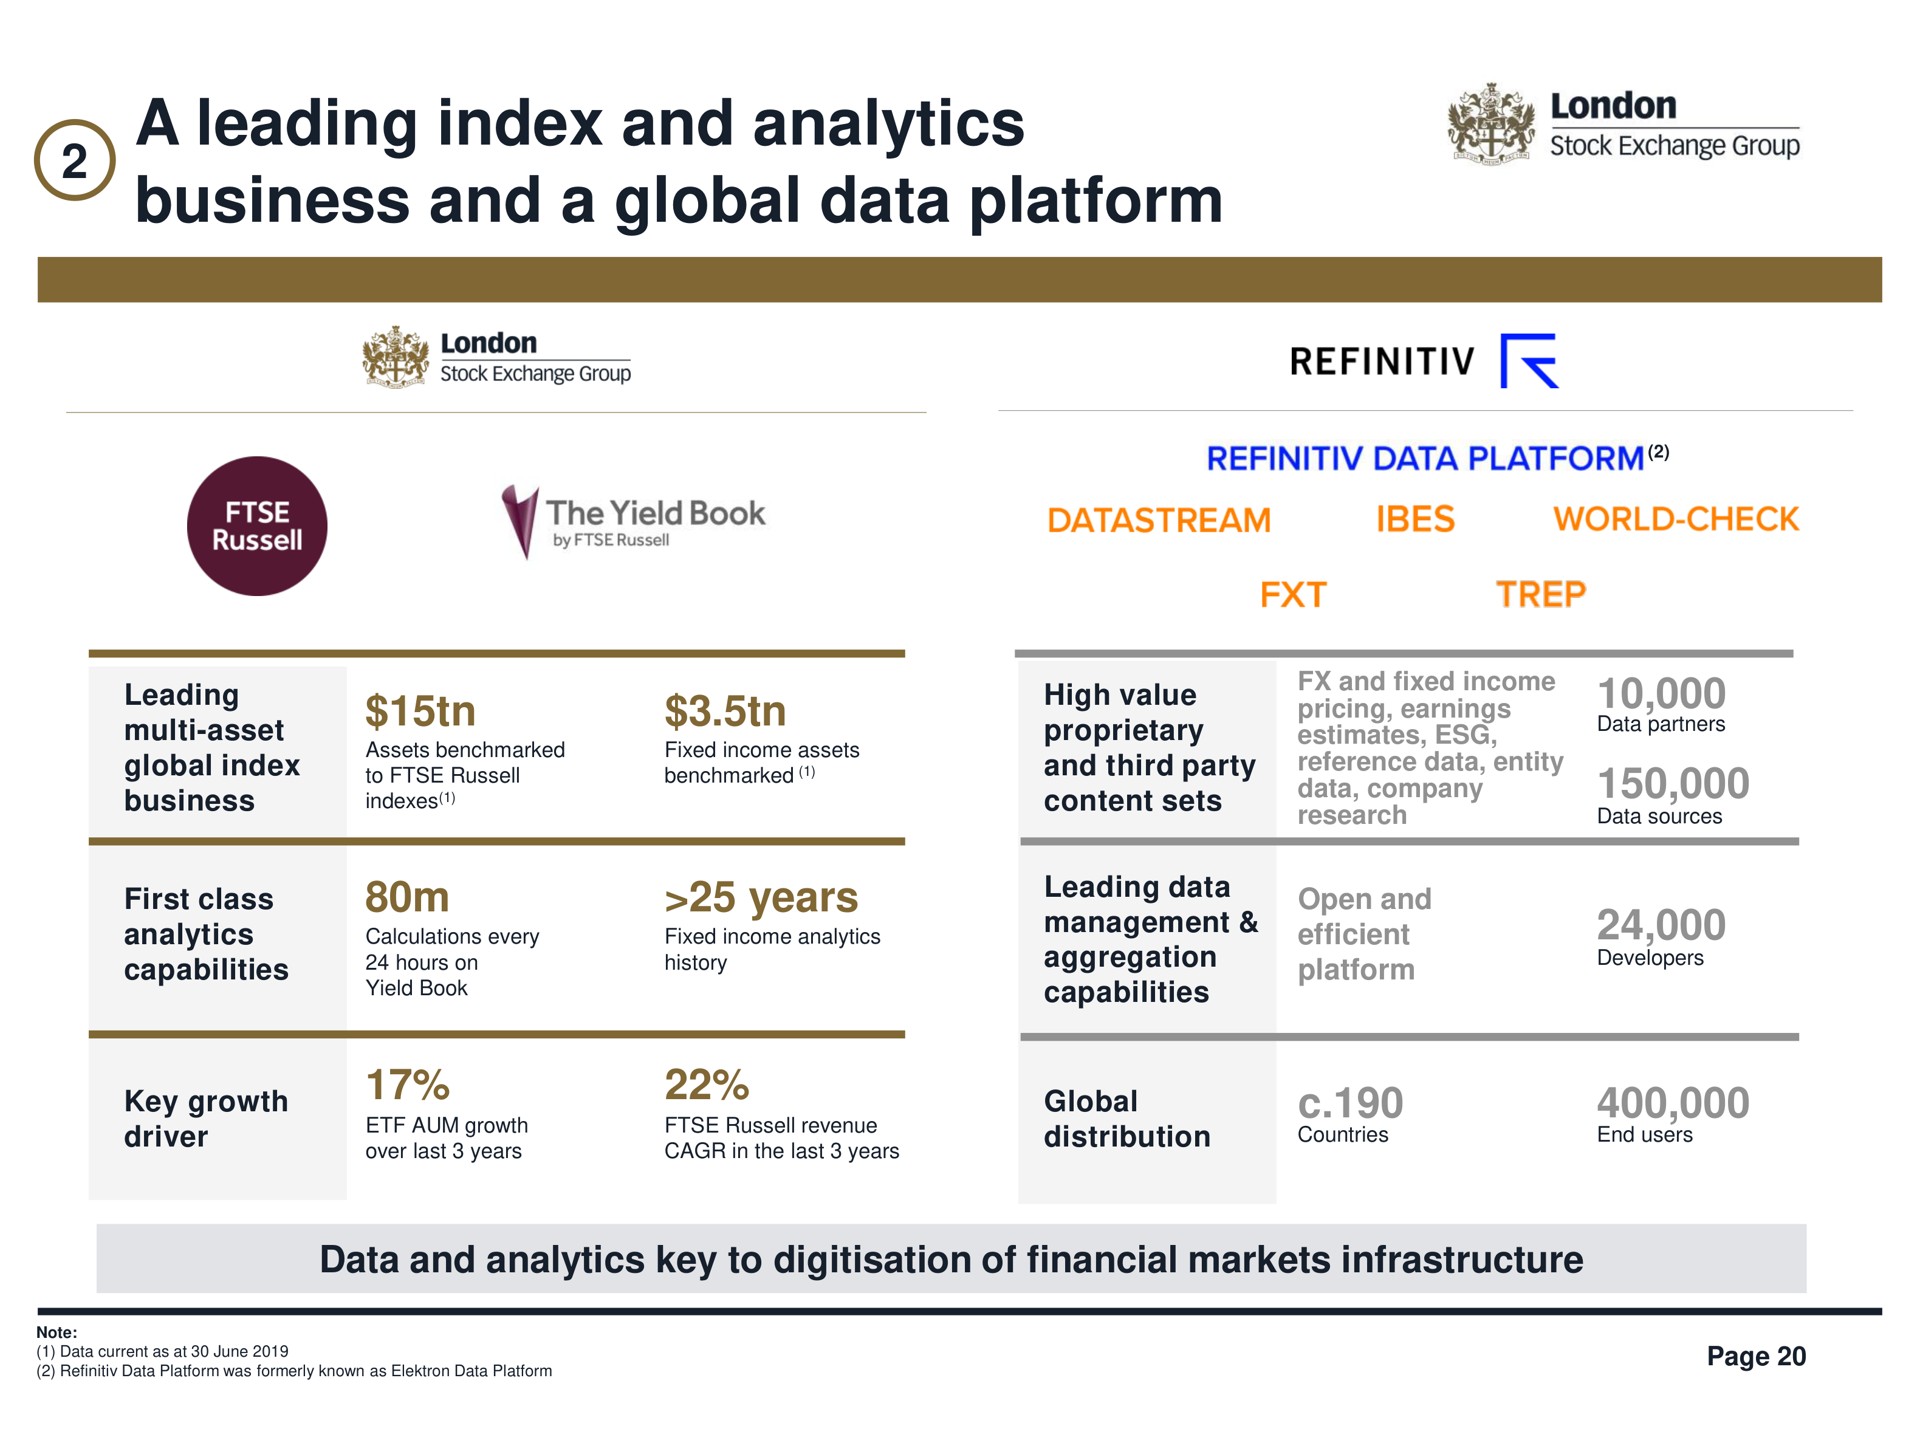 a leading index and analytics business and a global data platform fop stock exchange group | LSE